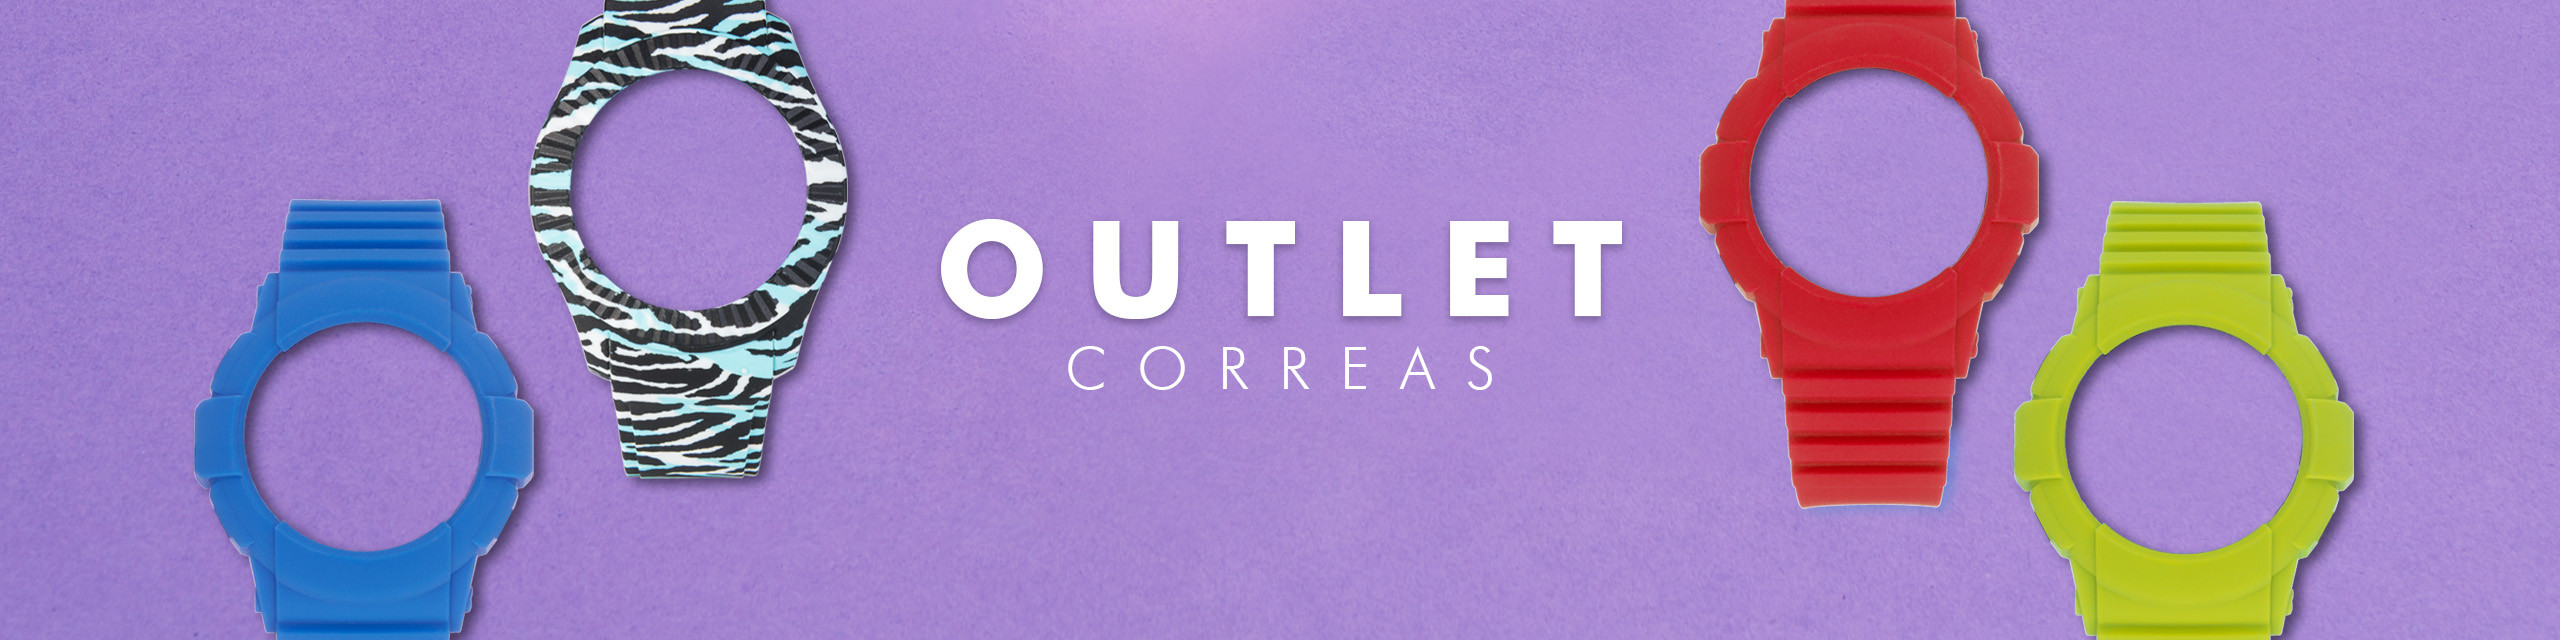 Correas outlet